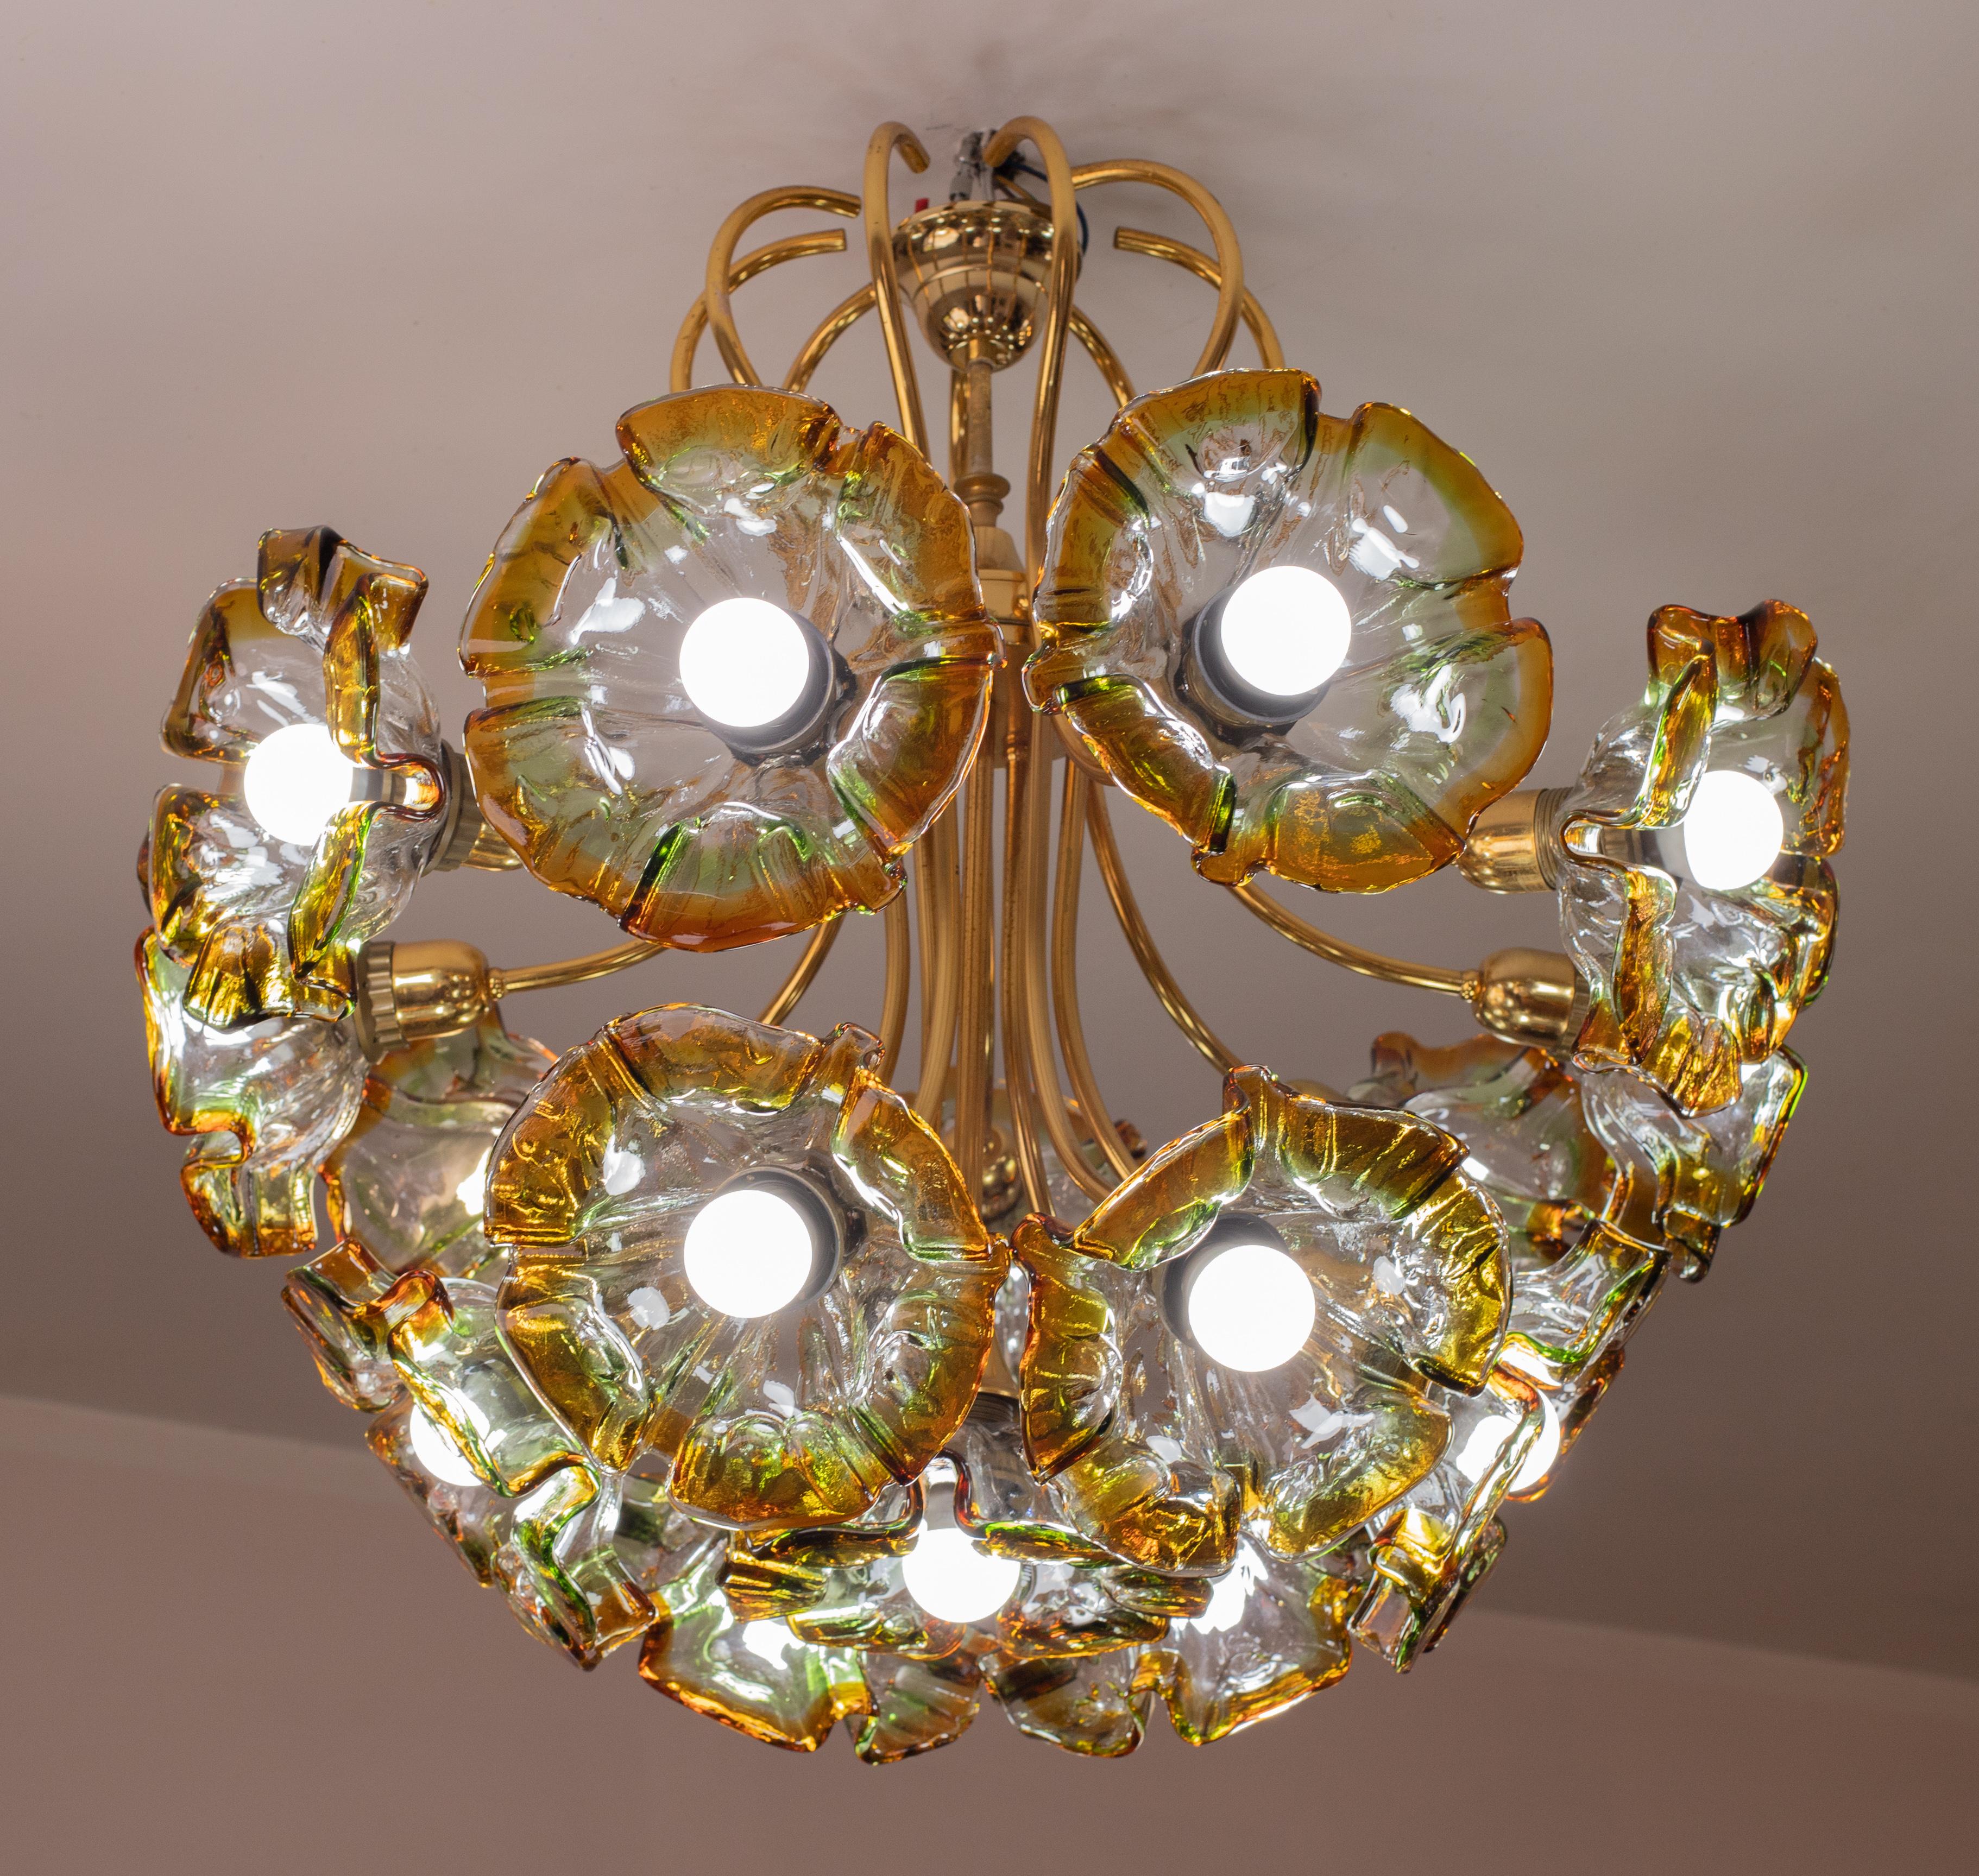 Italian multicolor Murano glass chandelier by Mazzega from the 1960s, fitted with European standard E27 sockets.

Composed of a dozen flowers with one light each.

Measurements: height 75 centimeters, diameter 80 centimeters.

Excellent vintage